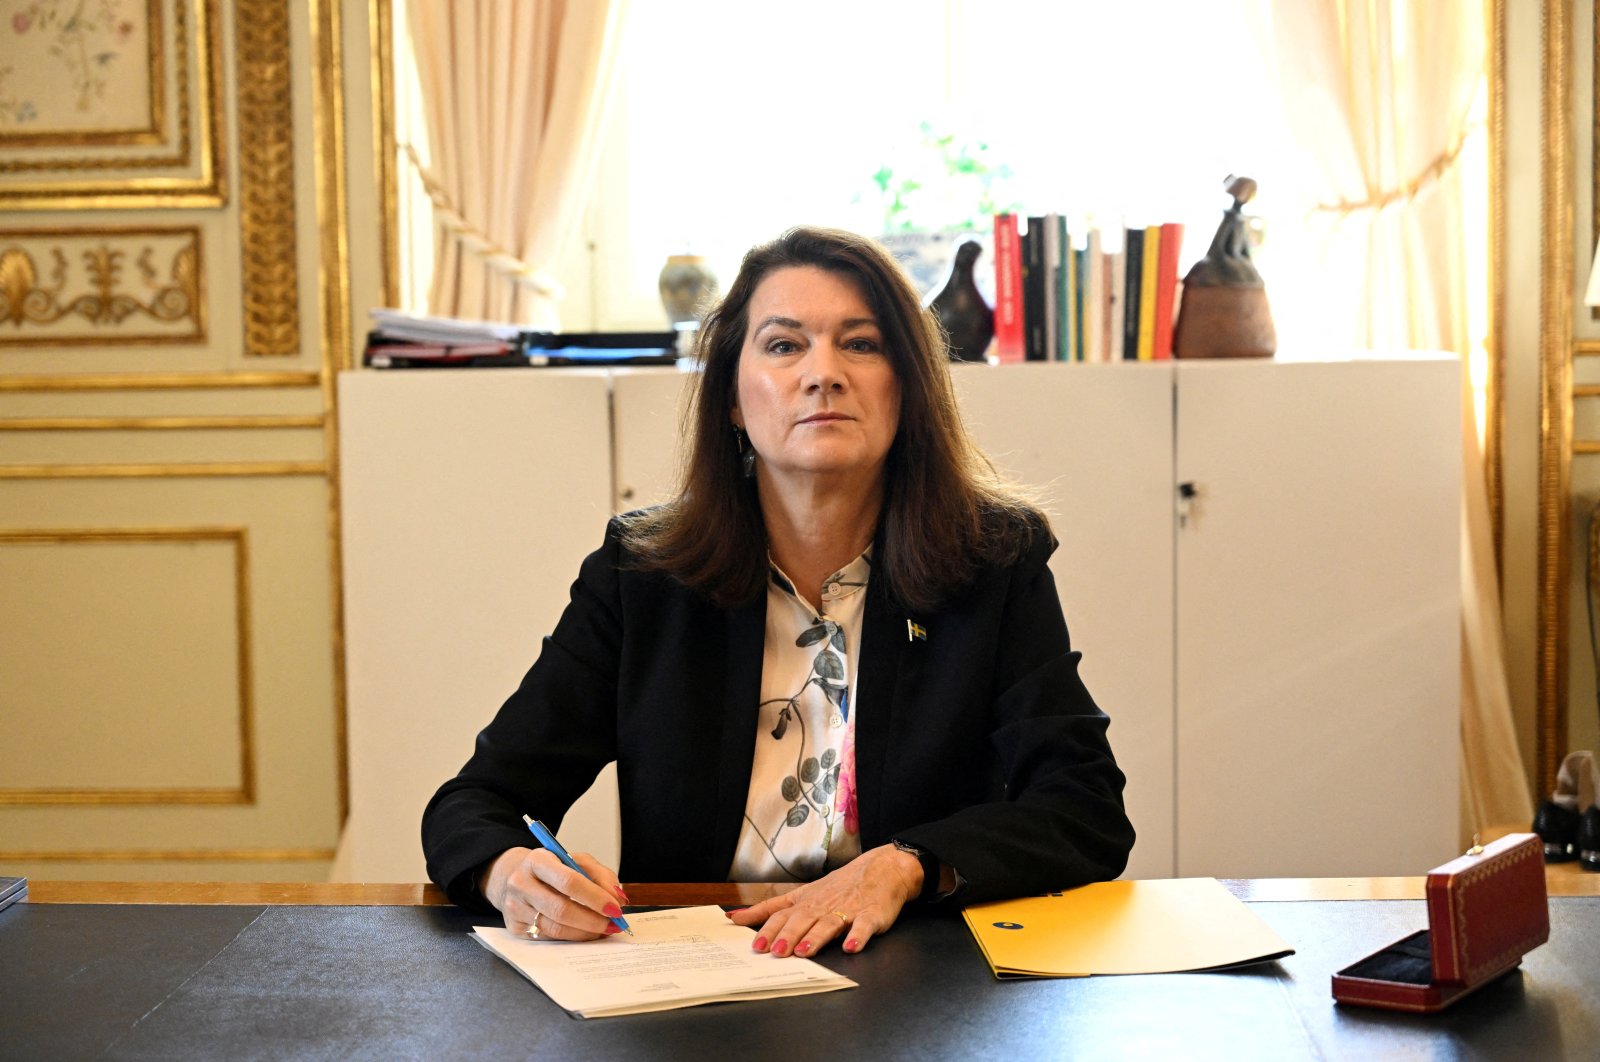 FILE PHOTO: Sweden's Foreign Minister Ann Linde signs the country's application for NATO membership at the Ministry of Foreign Affairs, amid Russia's invasion of Ukraine, in Stockholm, Sweden May 17, 2022. TT News Agency/Henrik Montgomery via REUTERS/File Photo